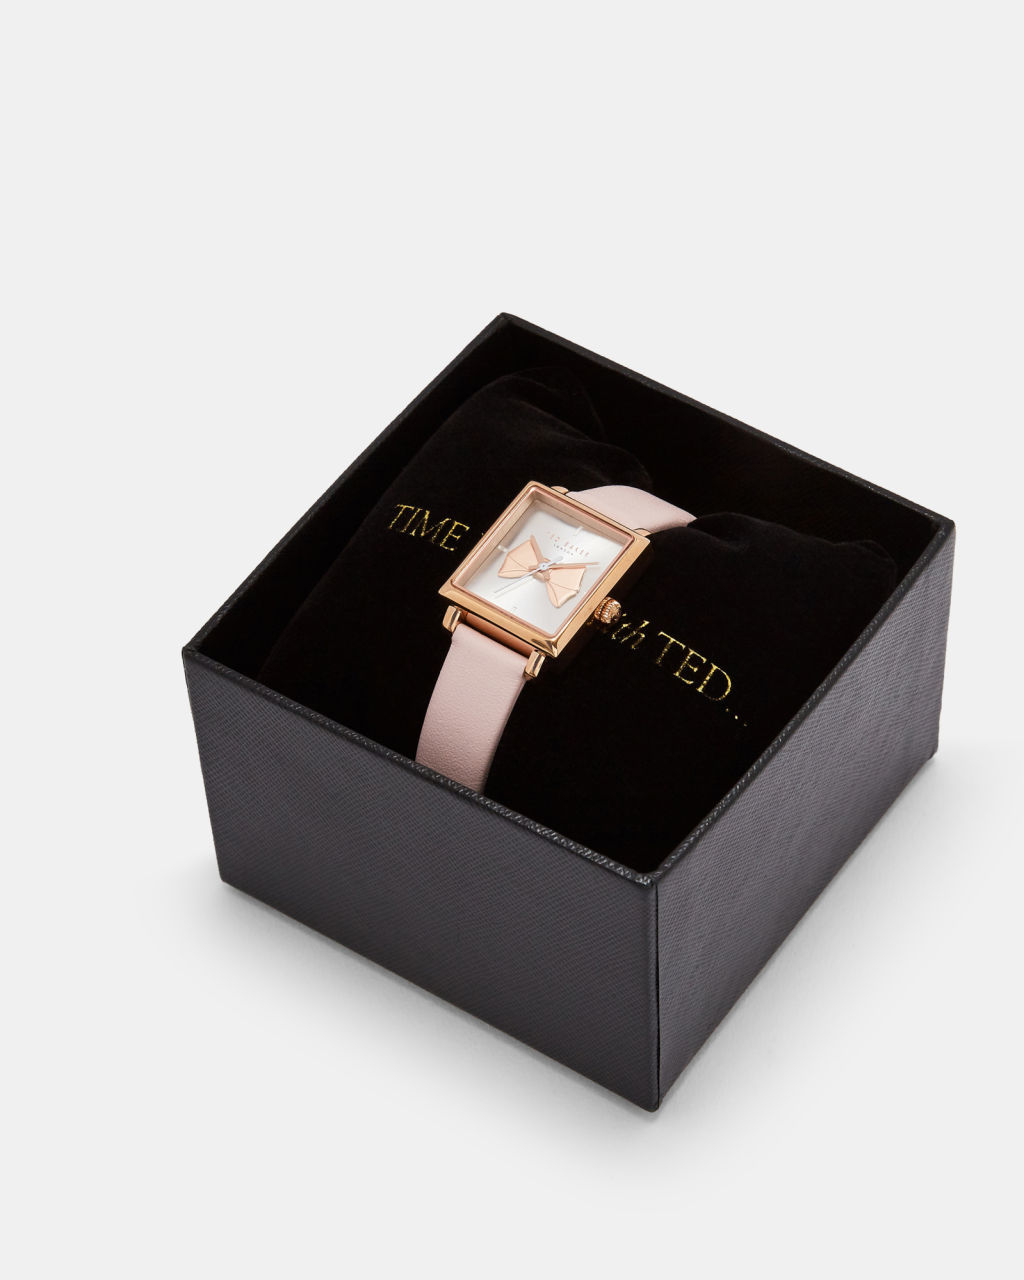 Ted Baker Ishabel Bow Square Watch